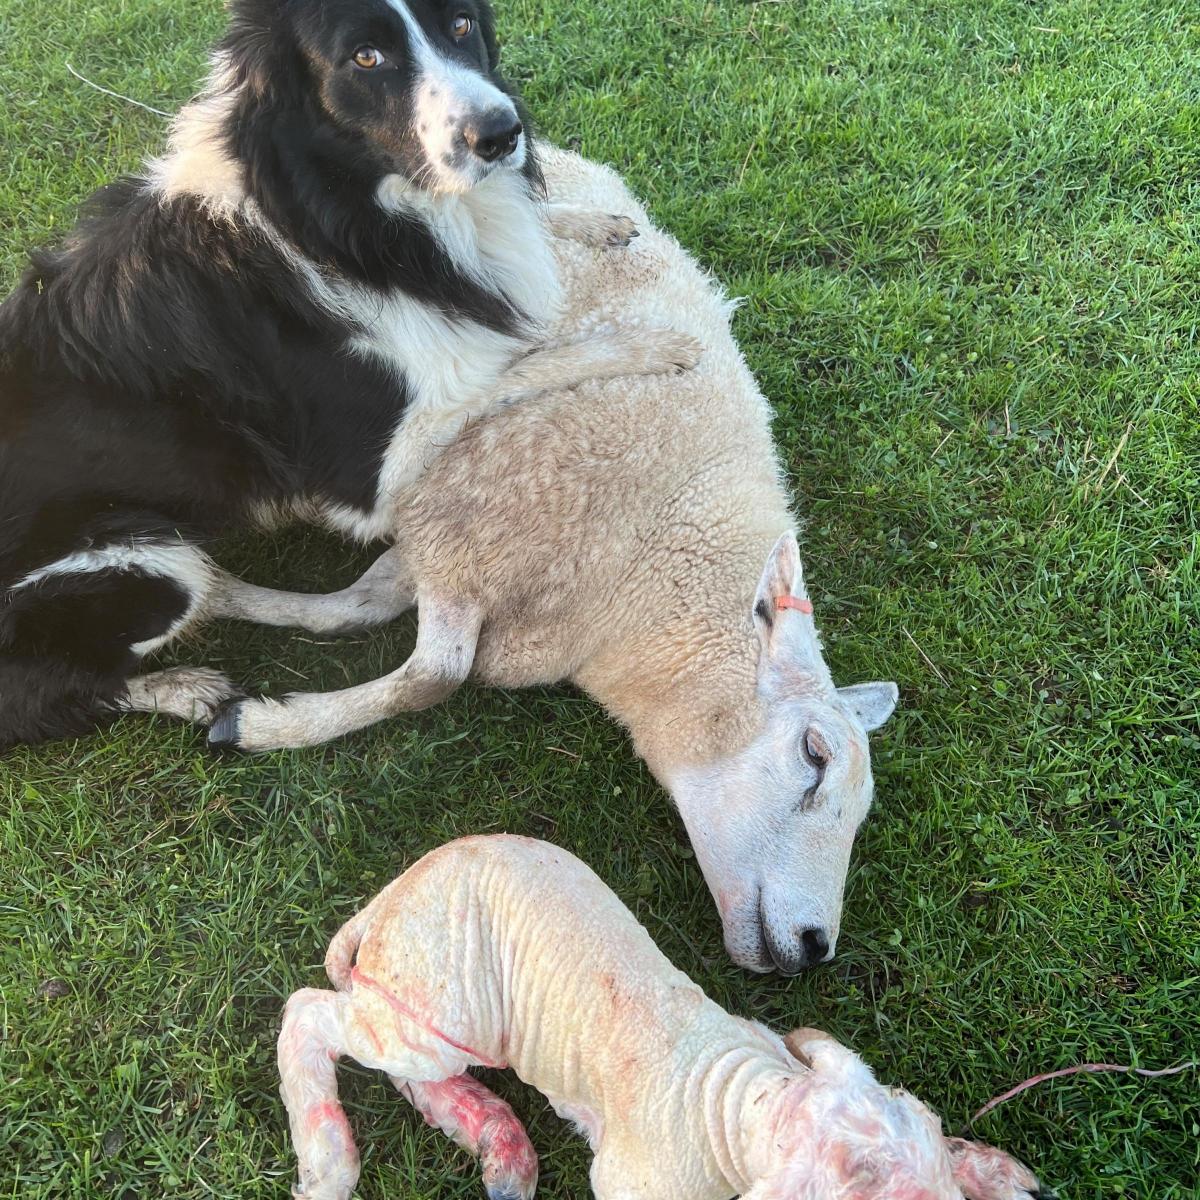 Jessie Bisset - Don’t worry mum! I’ve got her!” Sweep keeping a hood of the ewe while I go get the quad